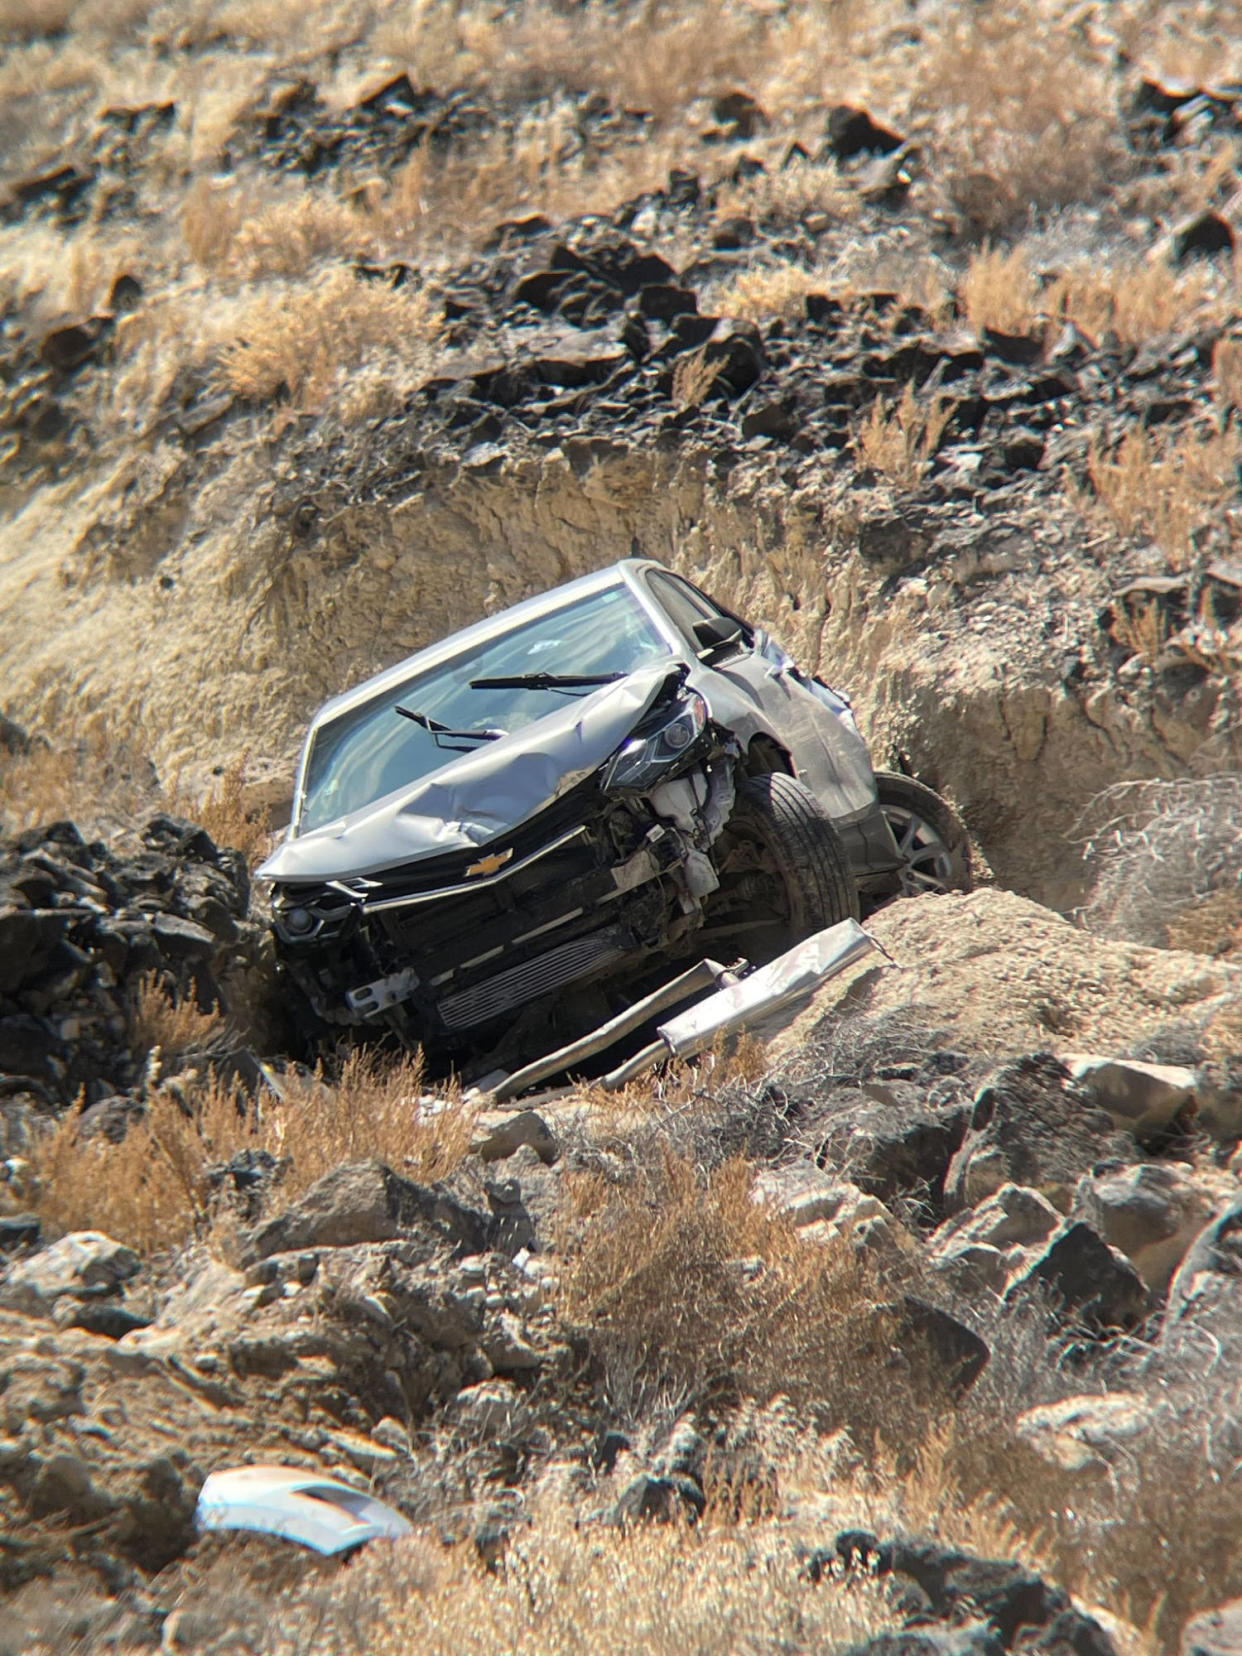 A 72-year-old woman was rescued after her wrecked car was found in rural southern Canyon County, Idaho. (Canyon County Sheriff's Office)